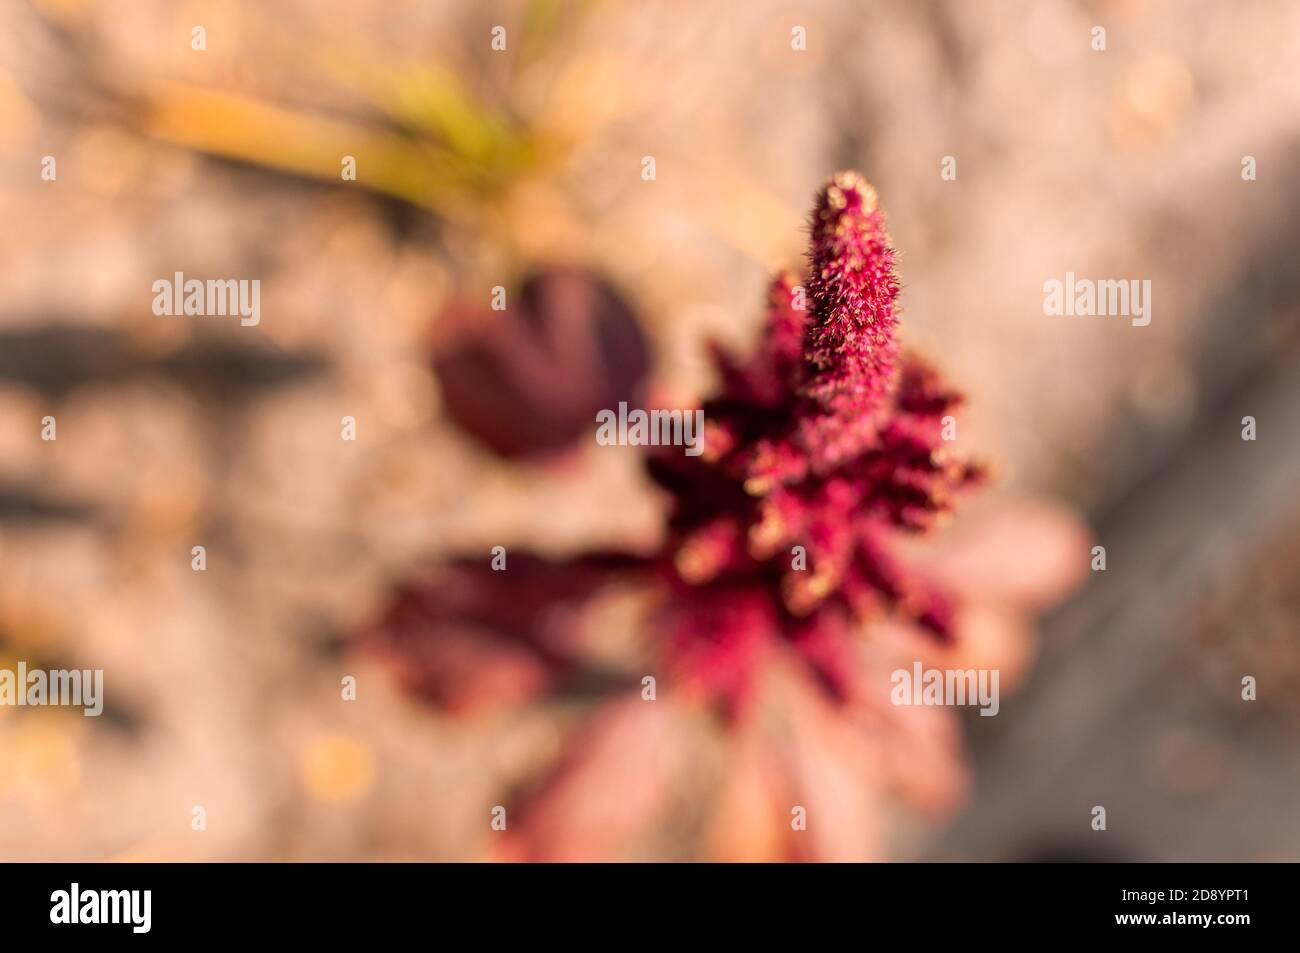 The tip of the fresh Amaranth flower, view from above. Amaranthus paniculatus. Stock Photo